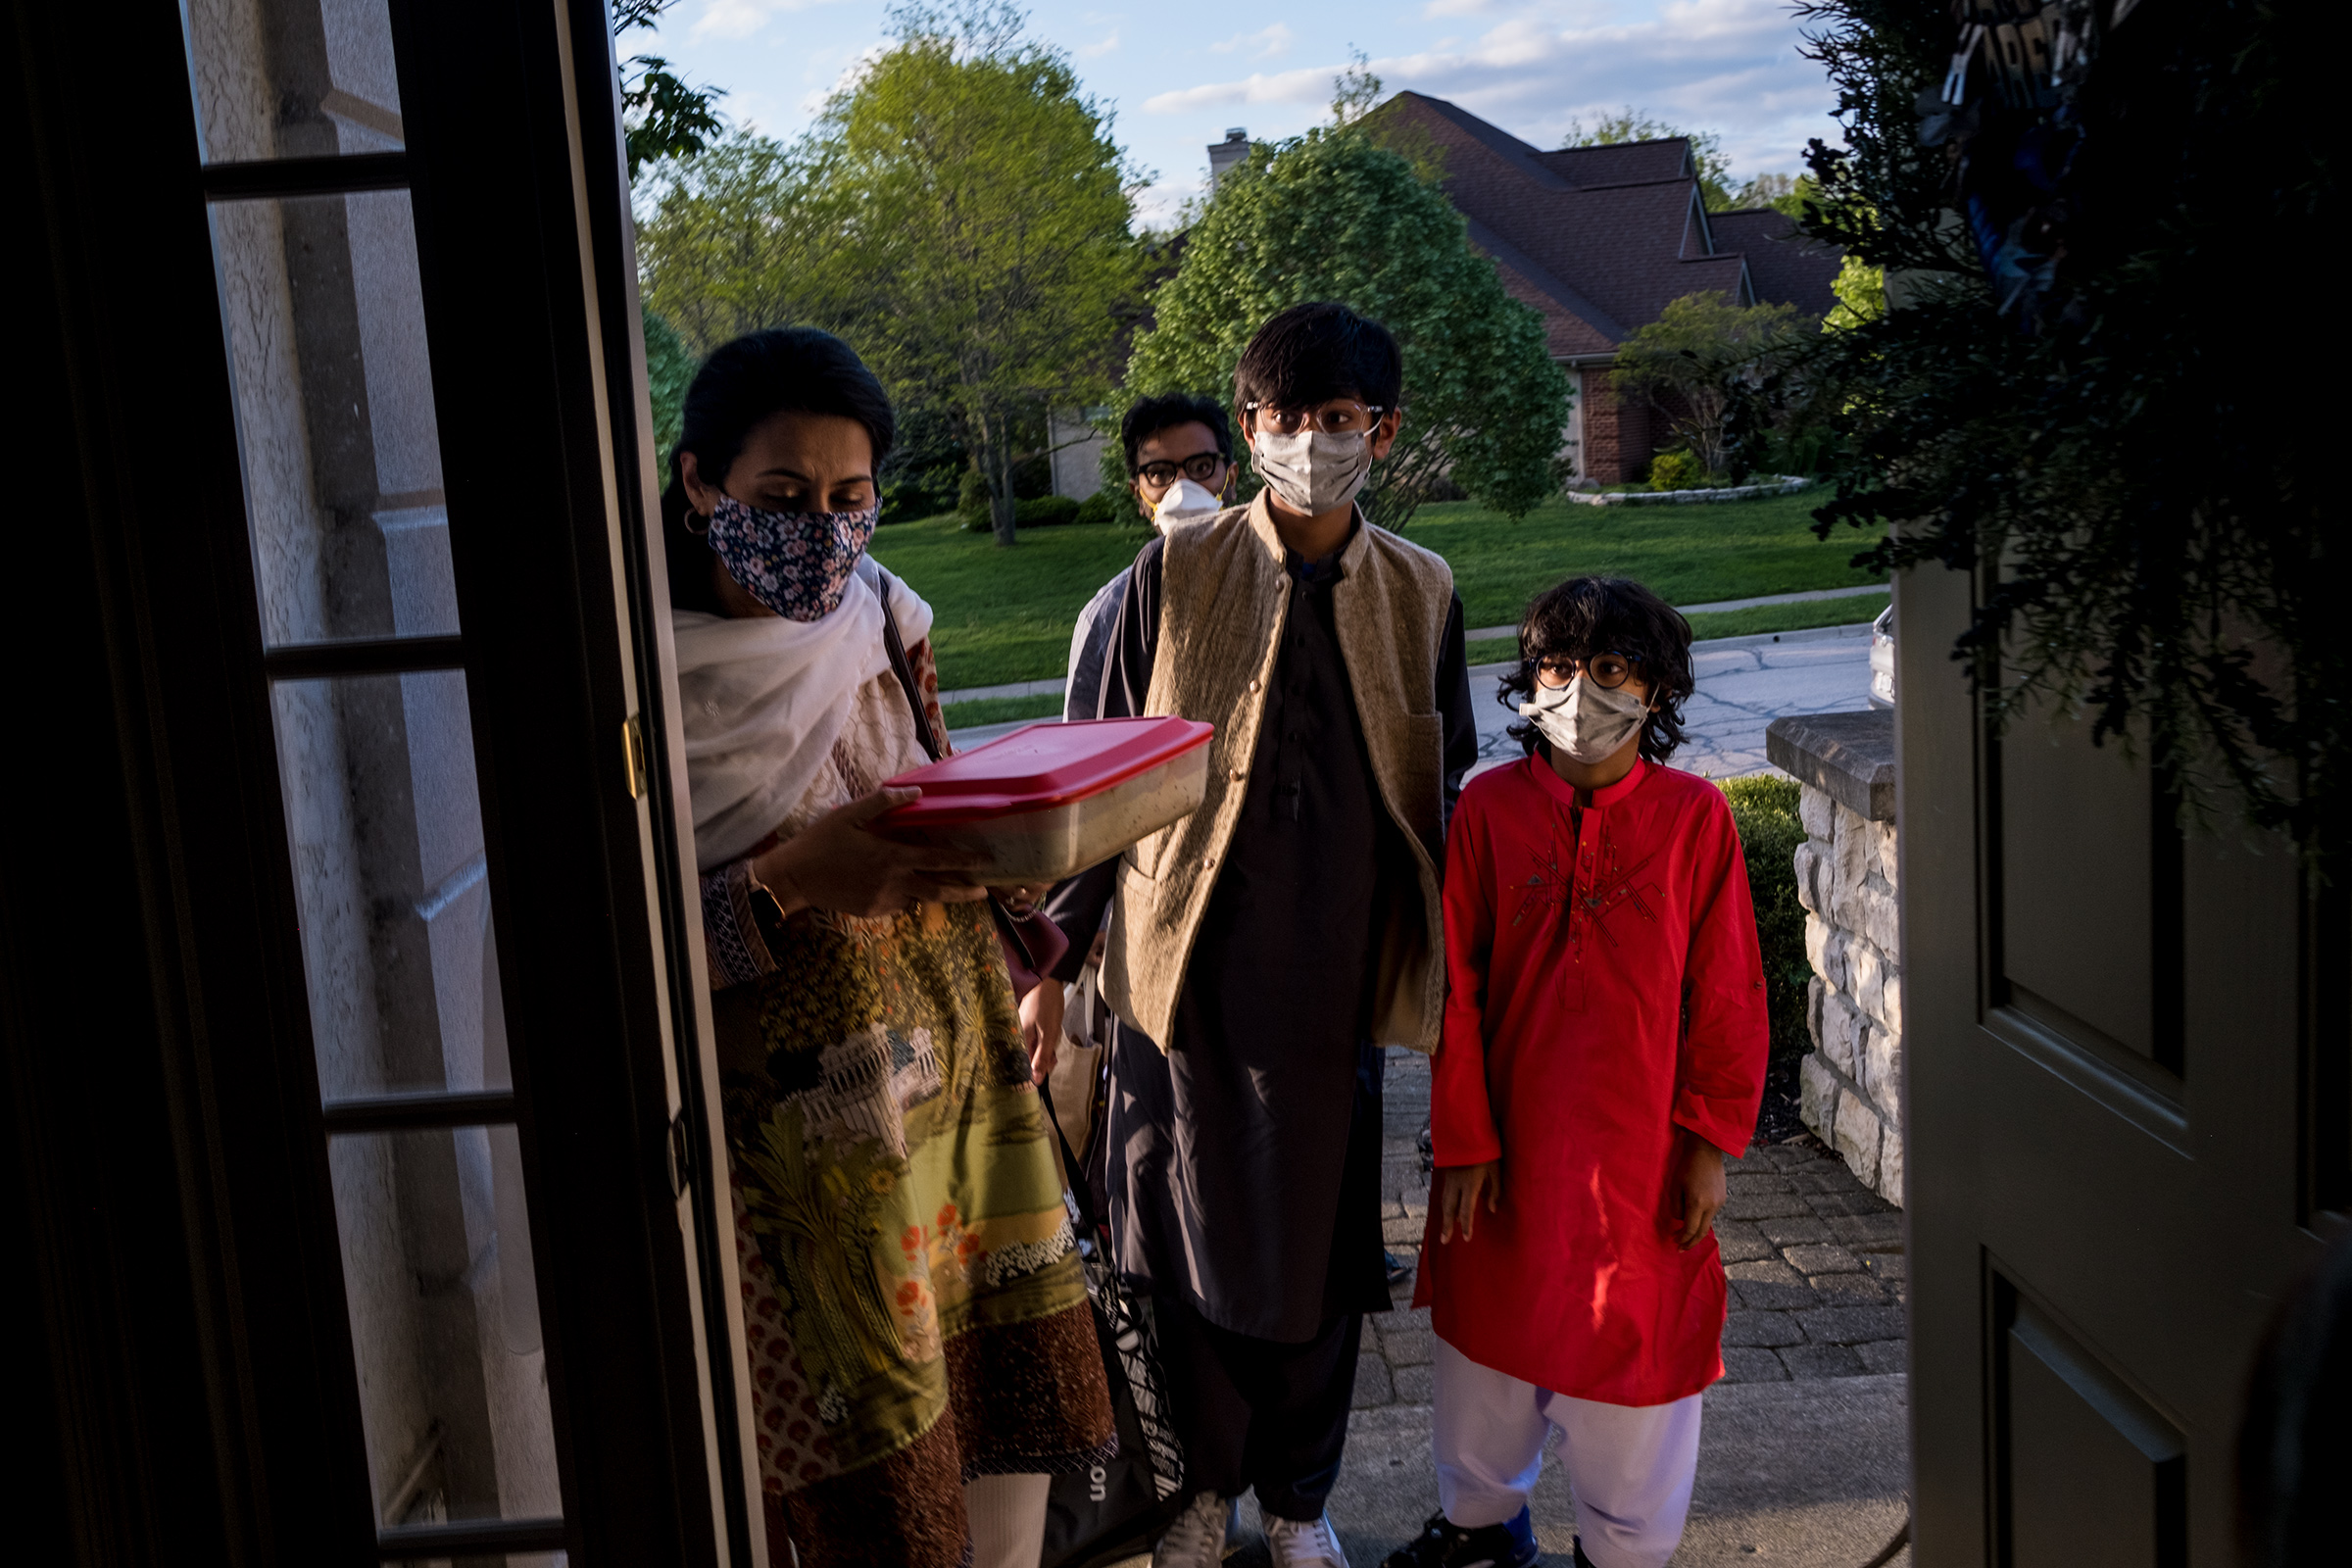 From left, Afsheen Rizvi, 45, her husband Tariq Sayed Rizvi, 45, behind, and their two sons Mahad, 12, and Arhem, 8, arrive at potluck dinner at their friend’s home in Dublin, Ohio on May 5. (Eli Hiller for TIME)